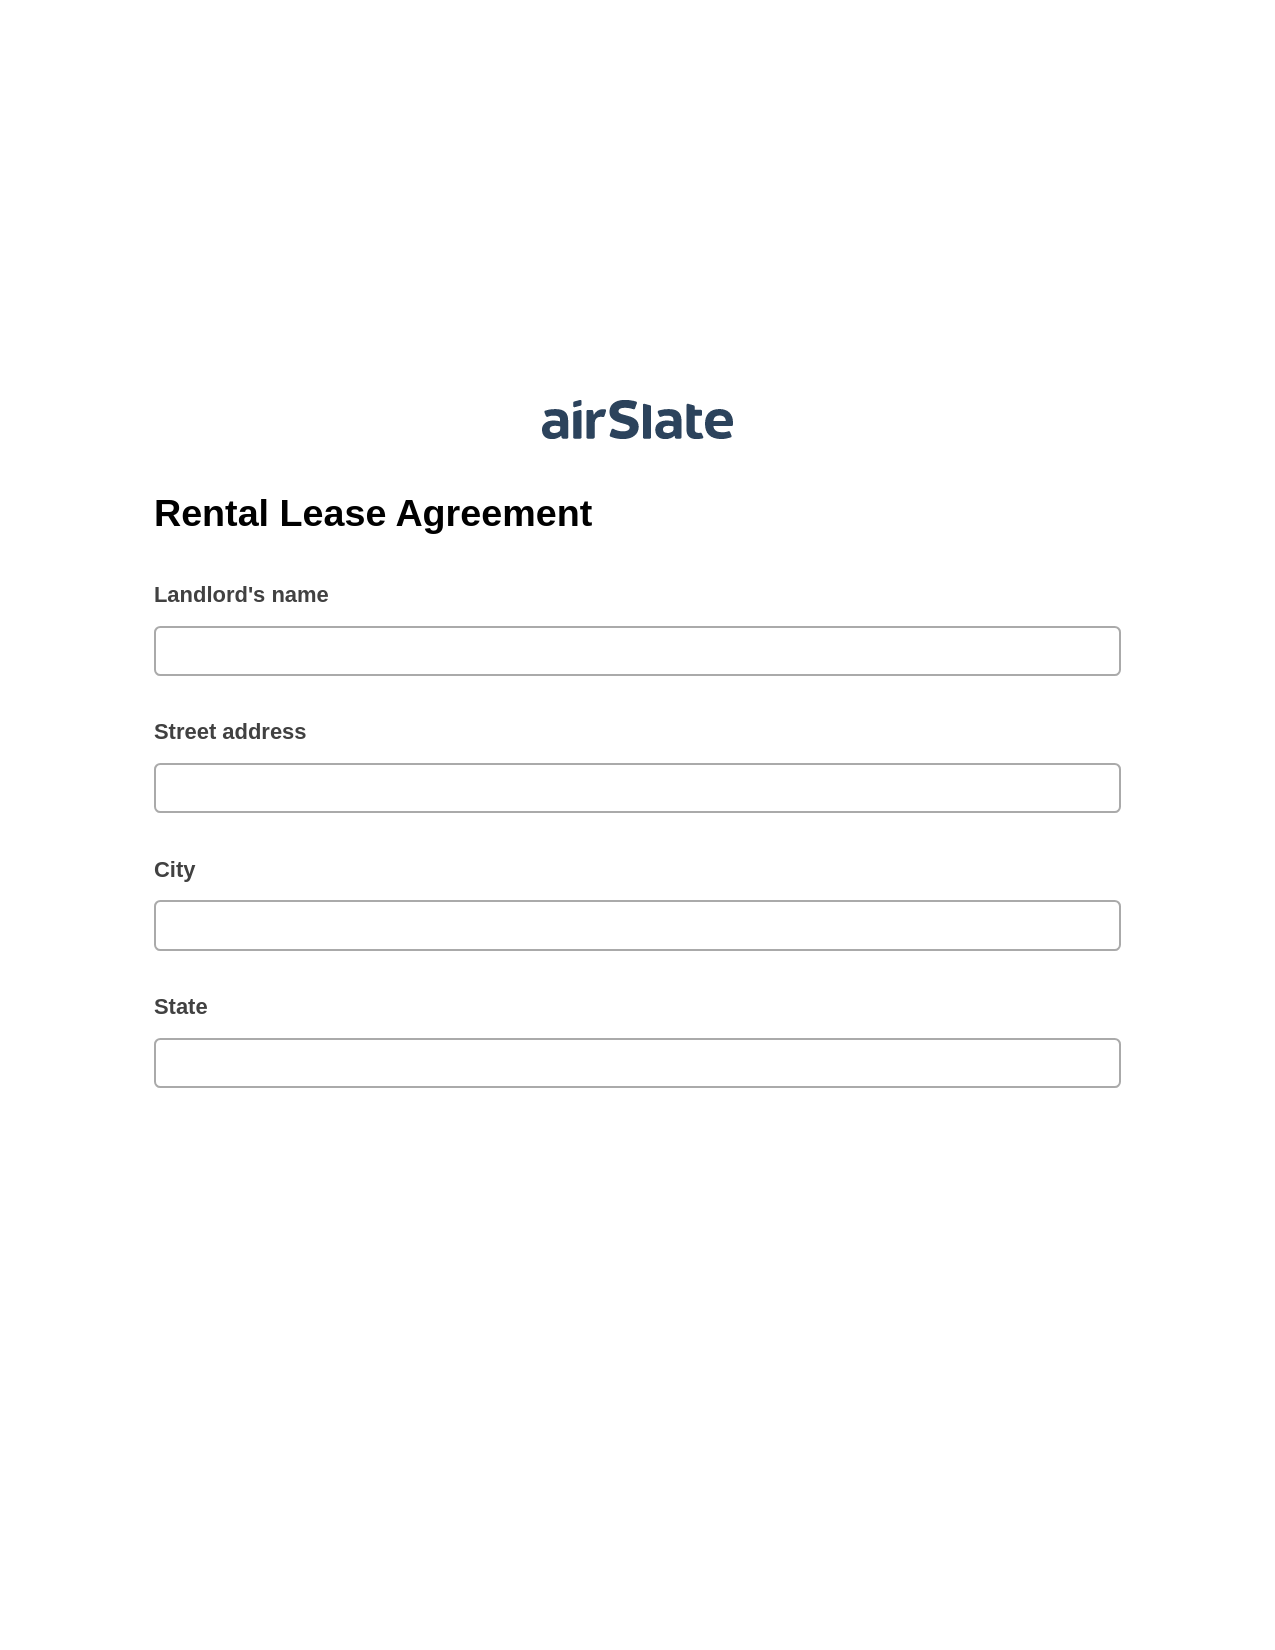 Rental Lease Agreement Pre-fill from Excel Spreadsheet Bot, Google Cloud Print Bot, Export to Formstack Documents Bot